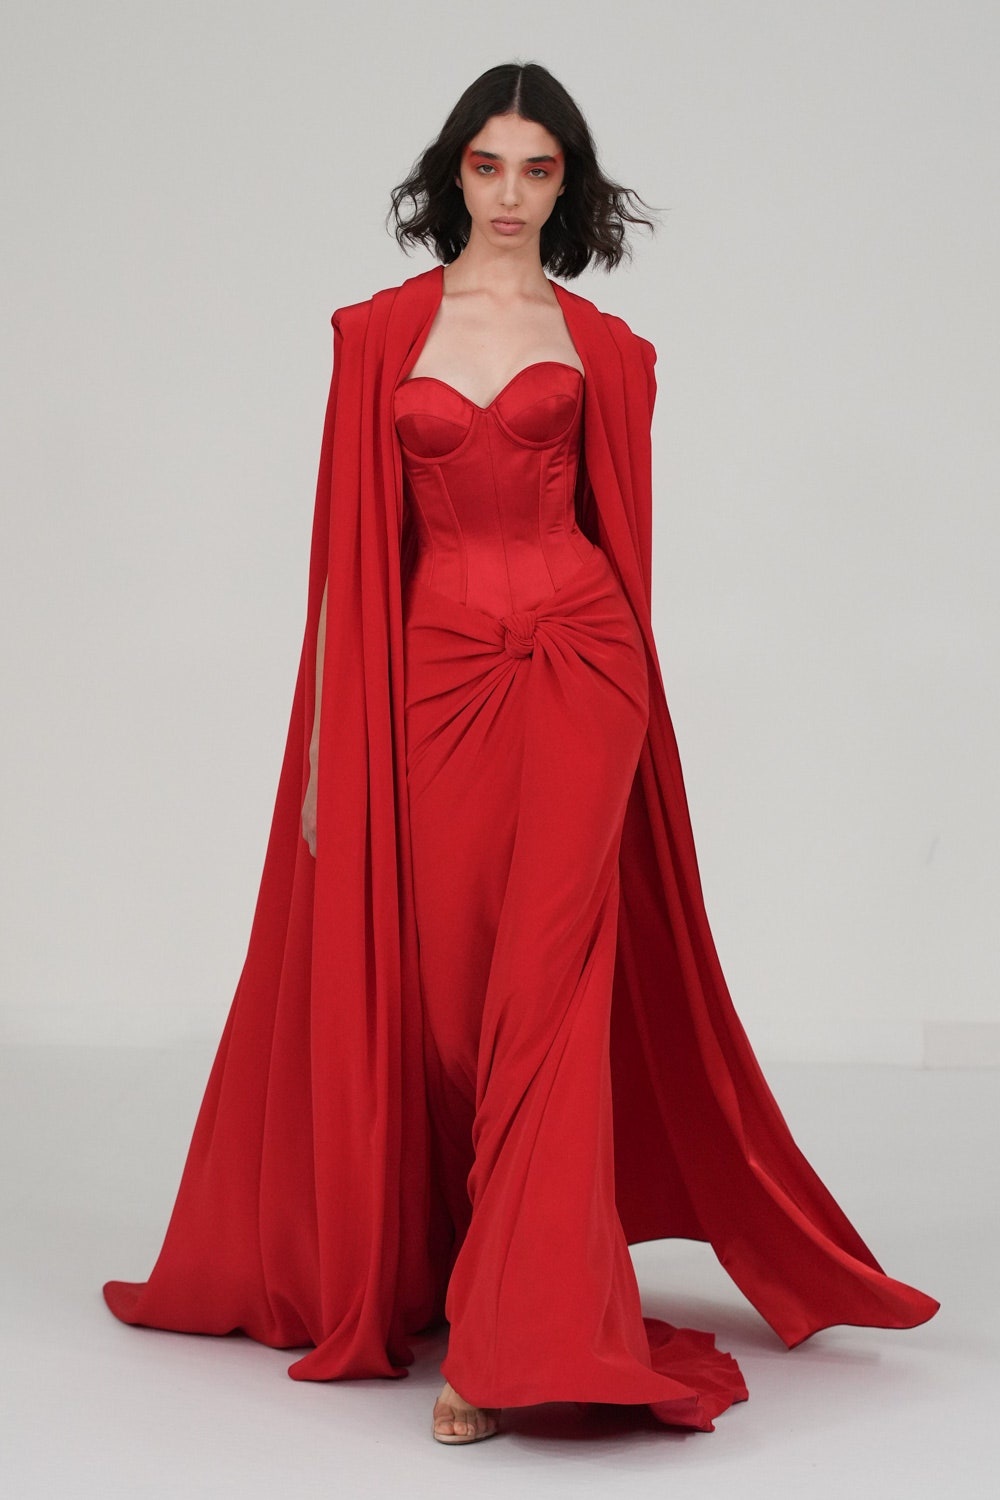 Alexis Mabille Spring Summer 2023 Haute Couture Fashion Show